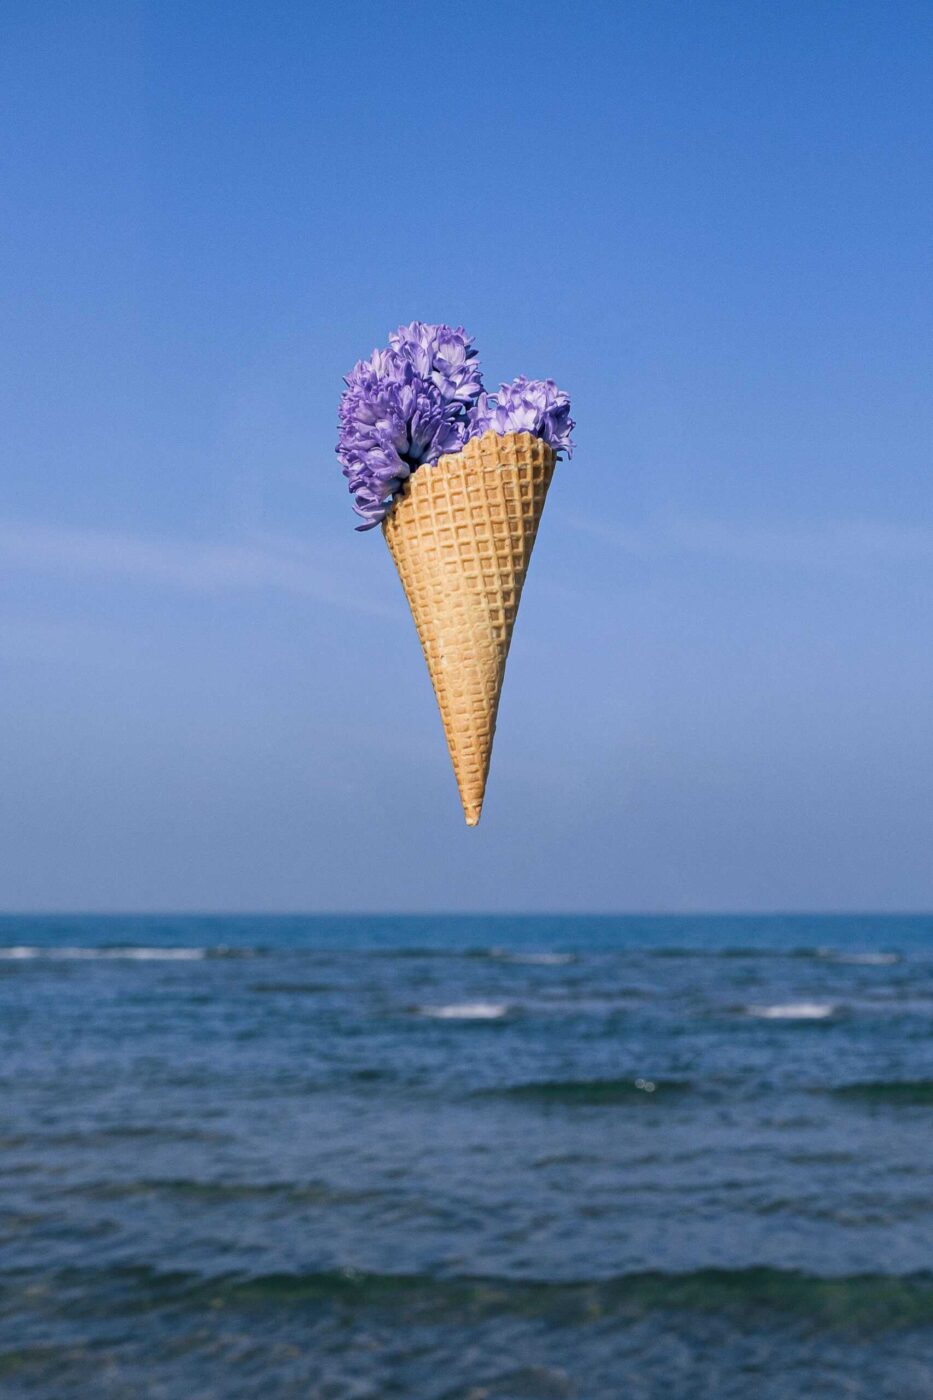 The waffle cone with small purple flowers hanging near the ocean.